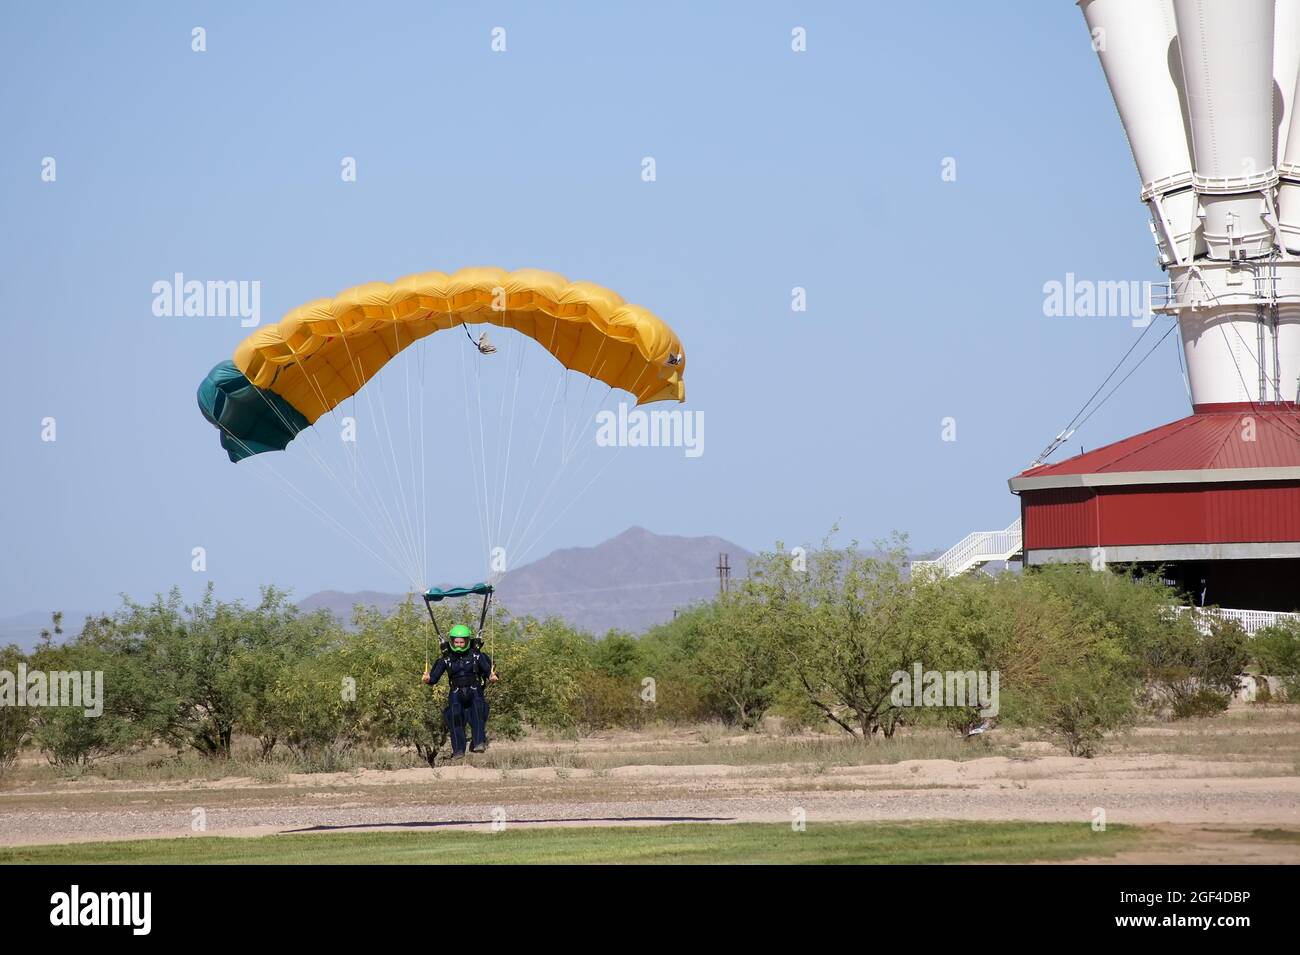 Skydiver landing his parachute with the free fall simulator in the background. Stock Photo